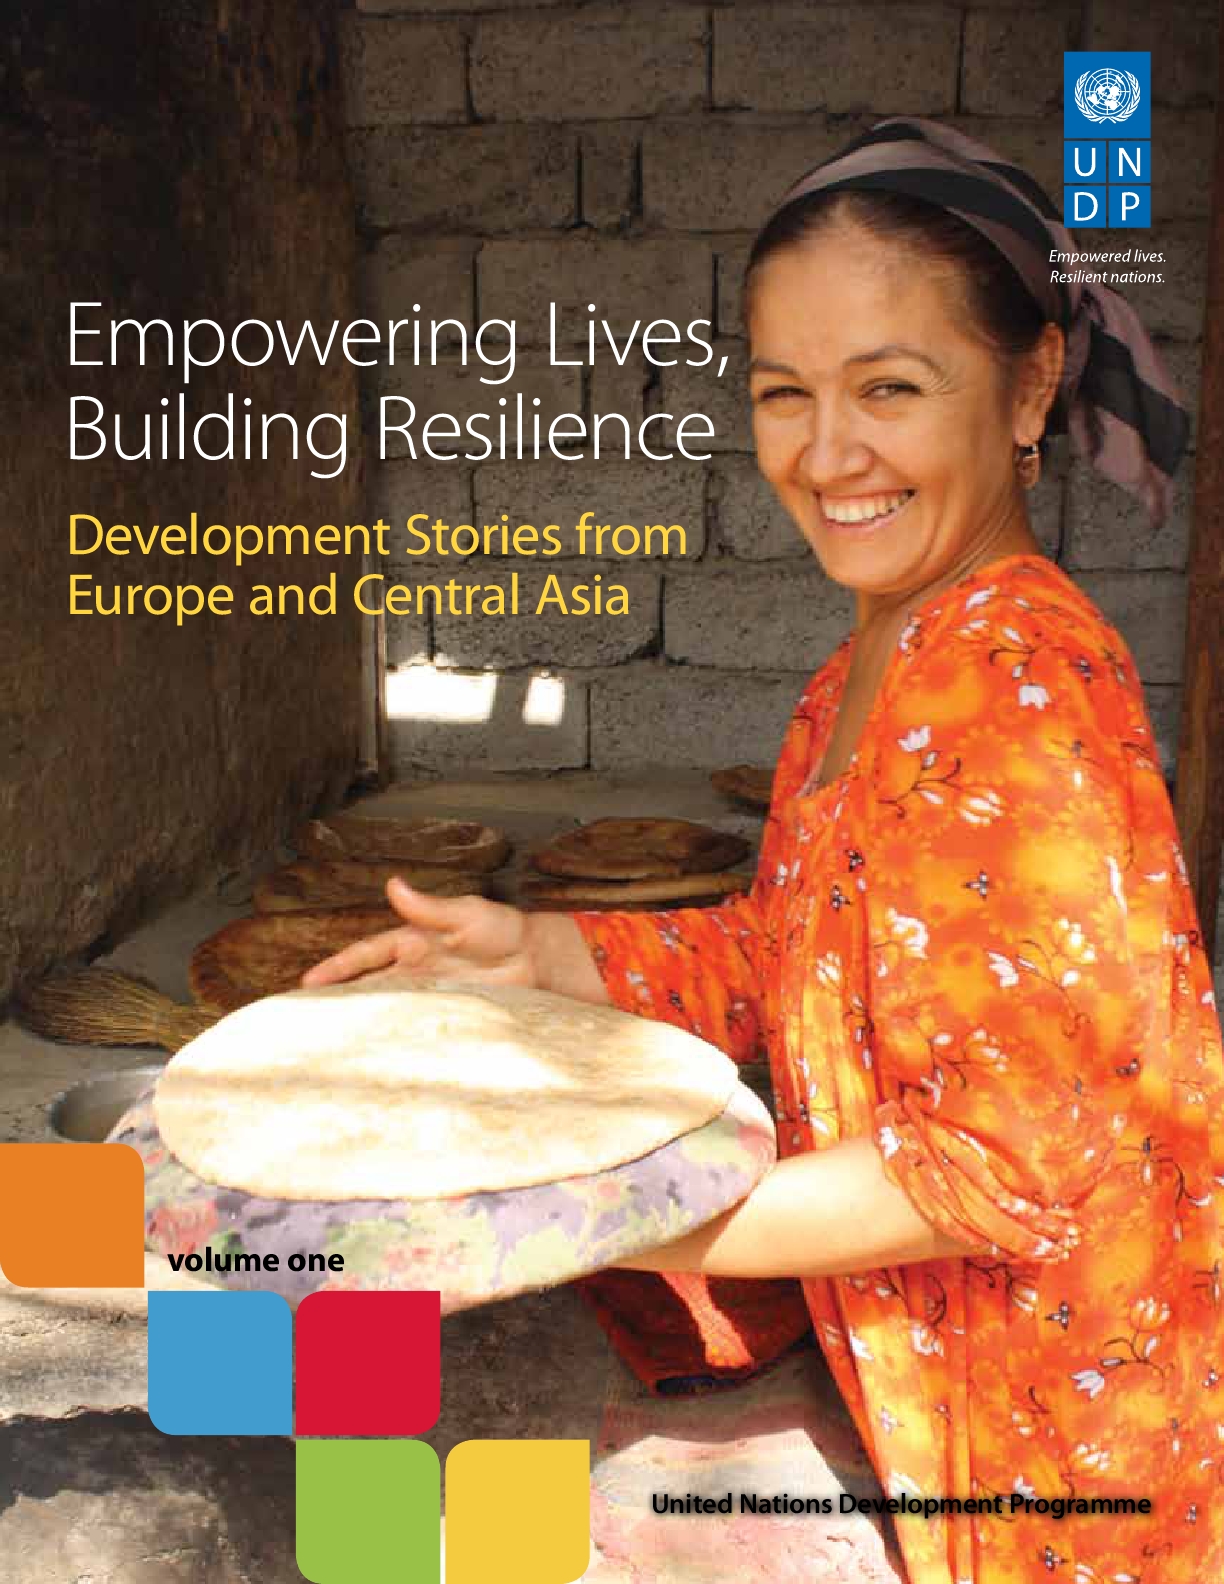 UNDP: Empowering Lives, Building Resilience: Development Stories from Europe and Central Asia, volume one